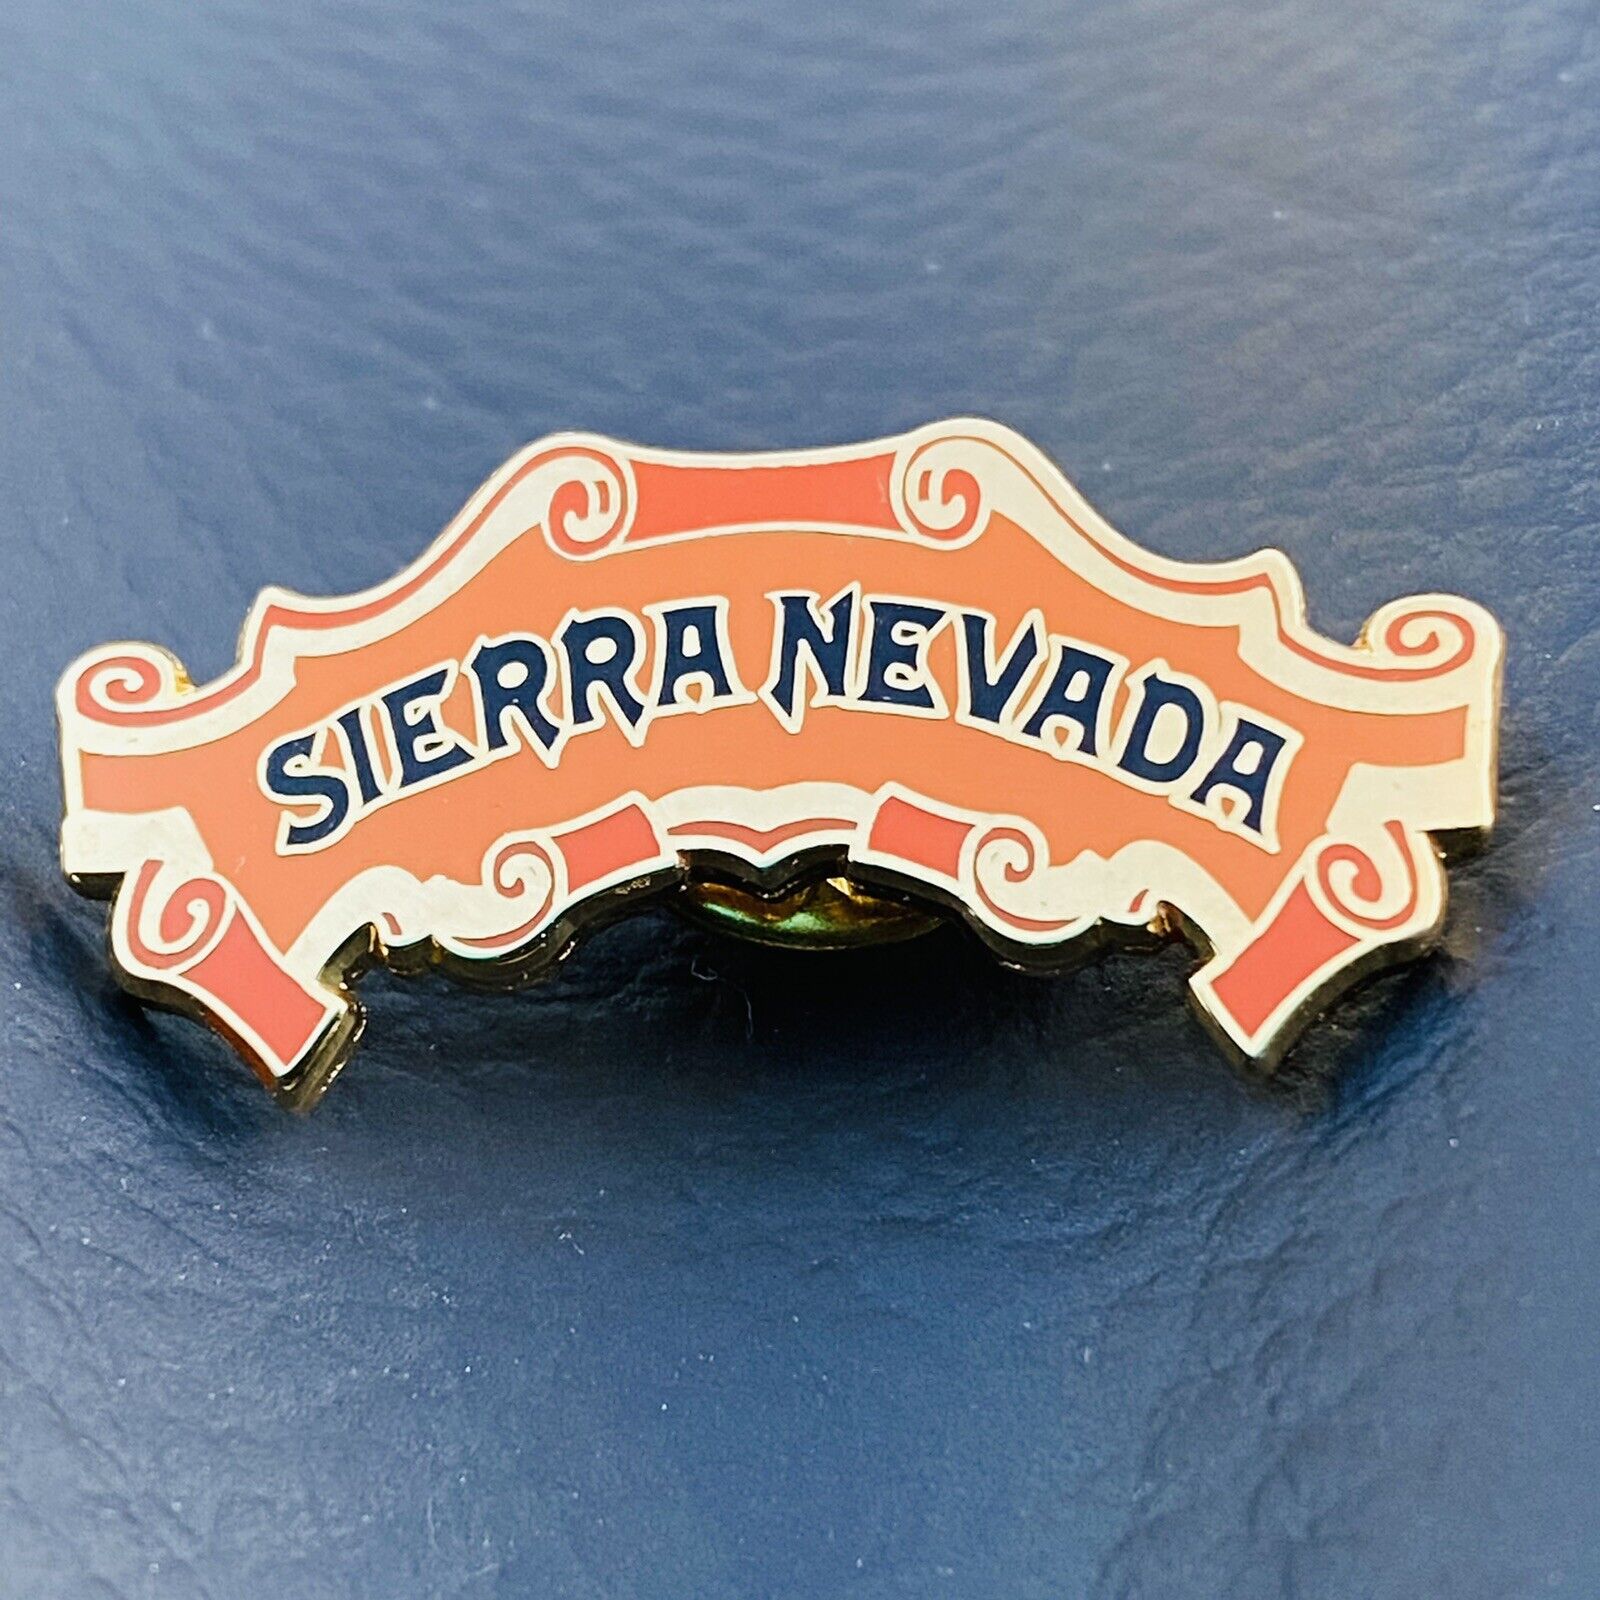 NEW Sierra Nevada Brewing Company Logo Pin Craft Beer Lapel Hat Tie Pin 1 Inch